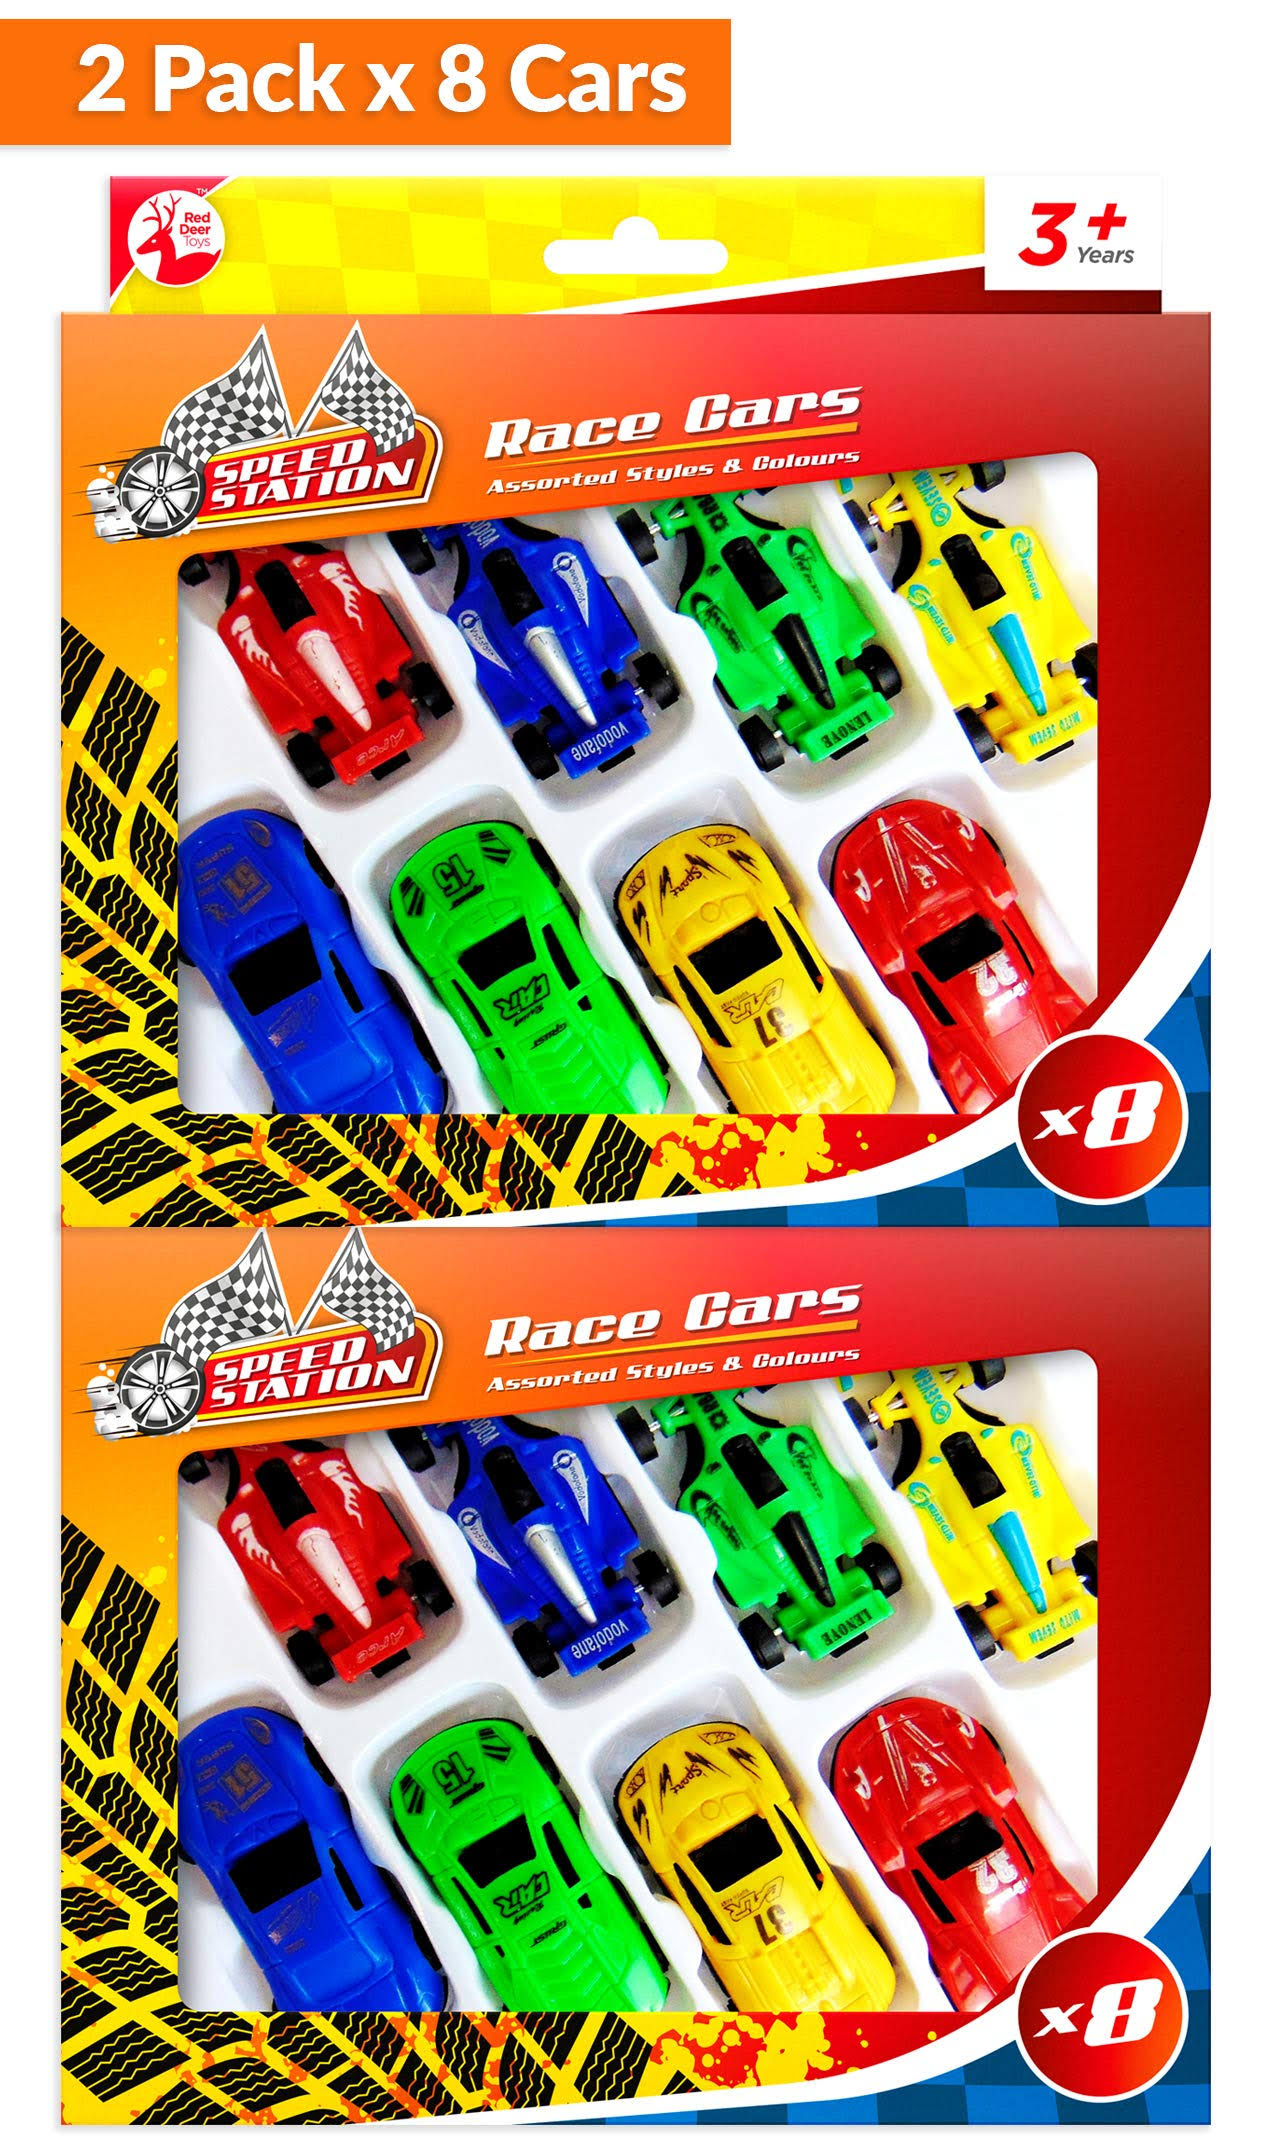 Speed Station Racing Car Toy Set - pack of 8